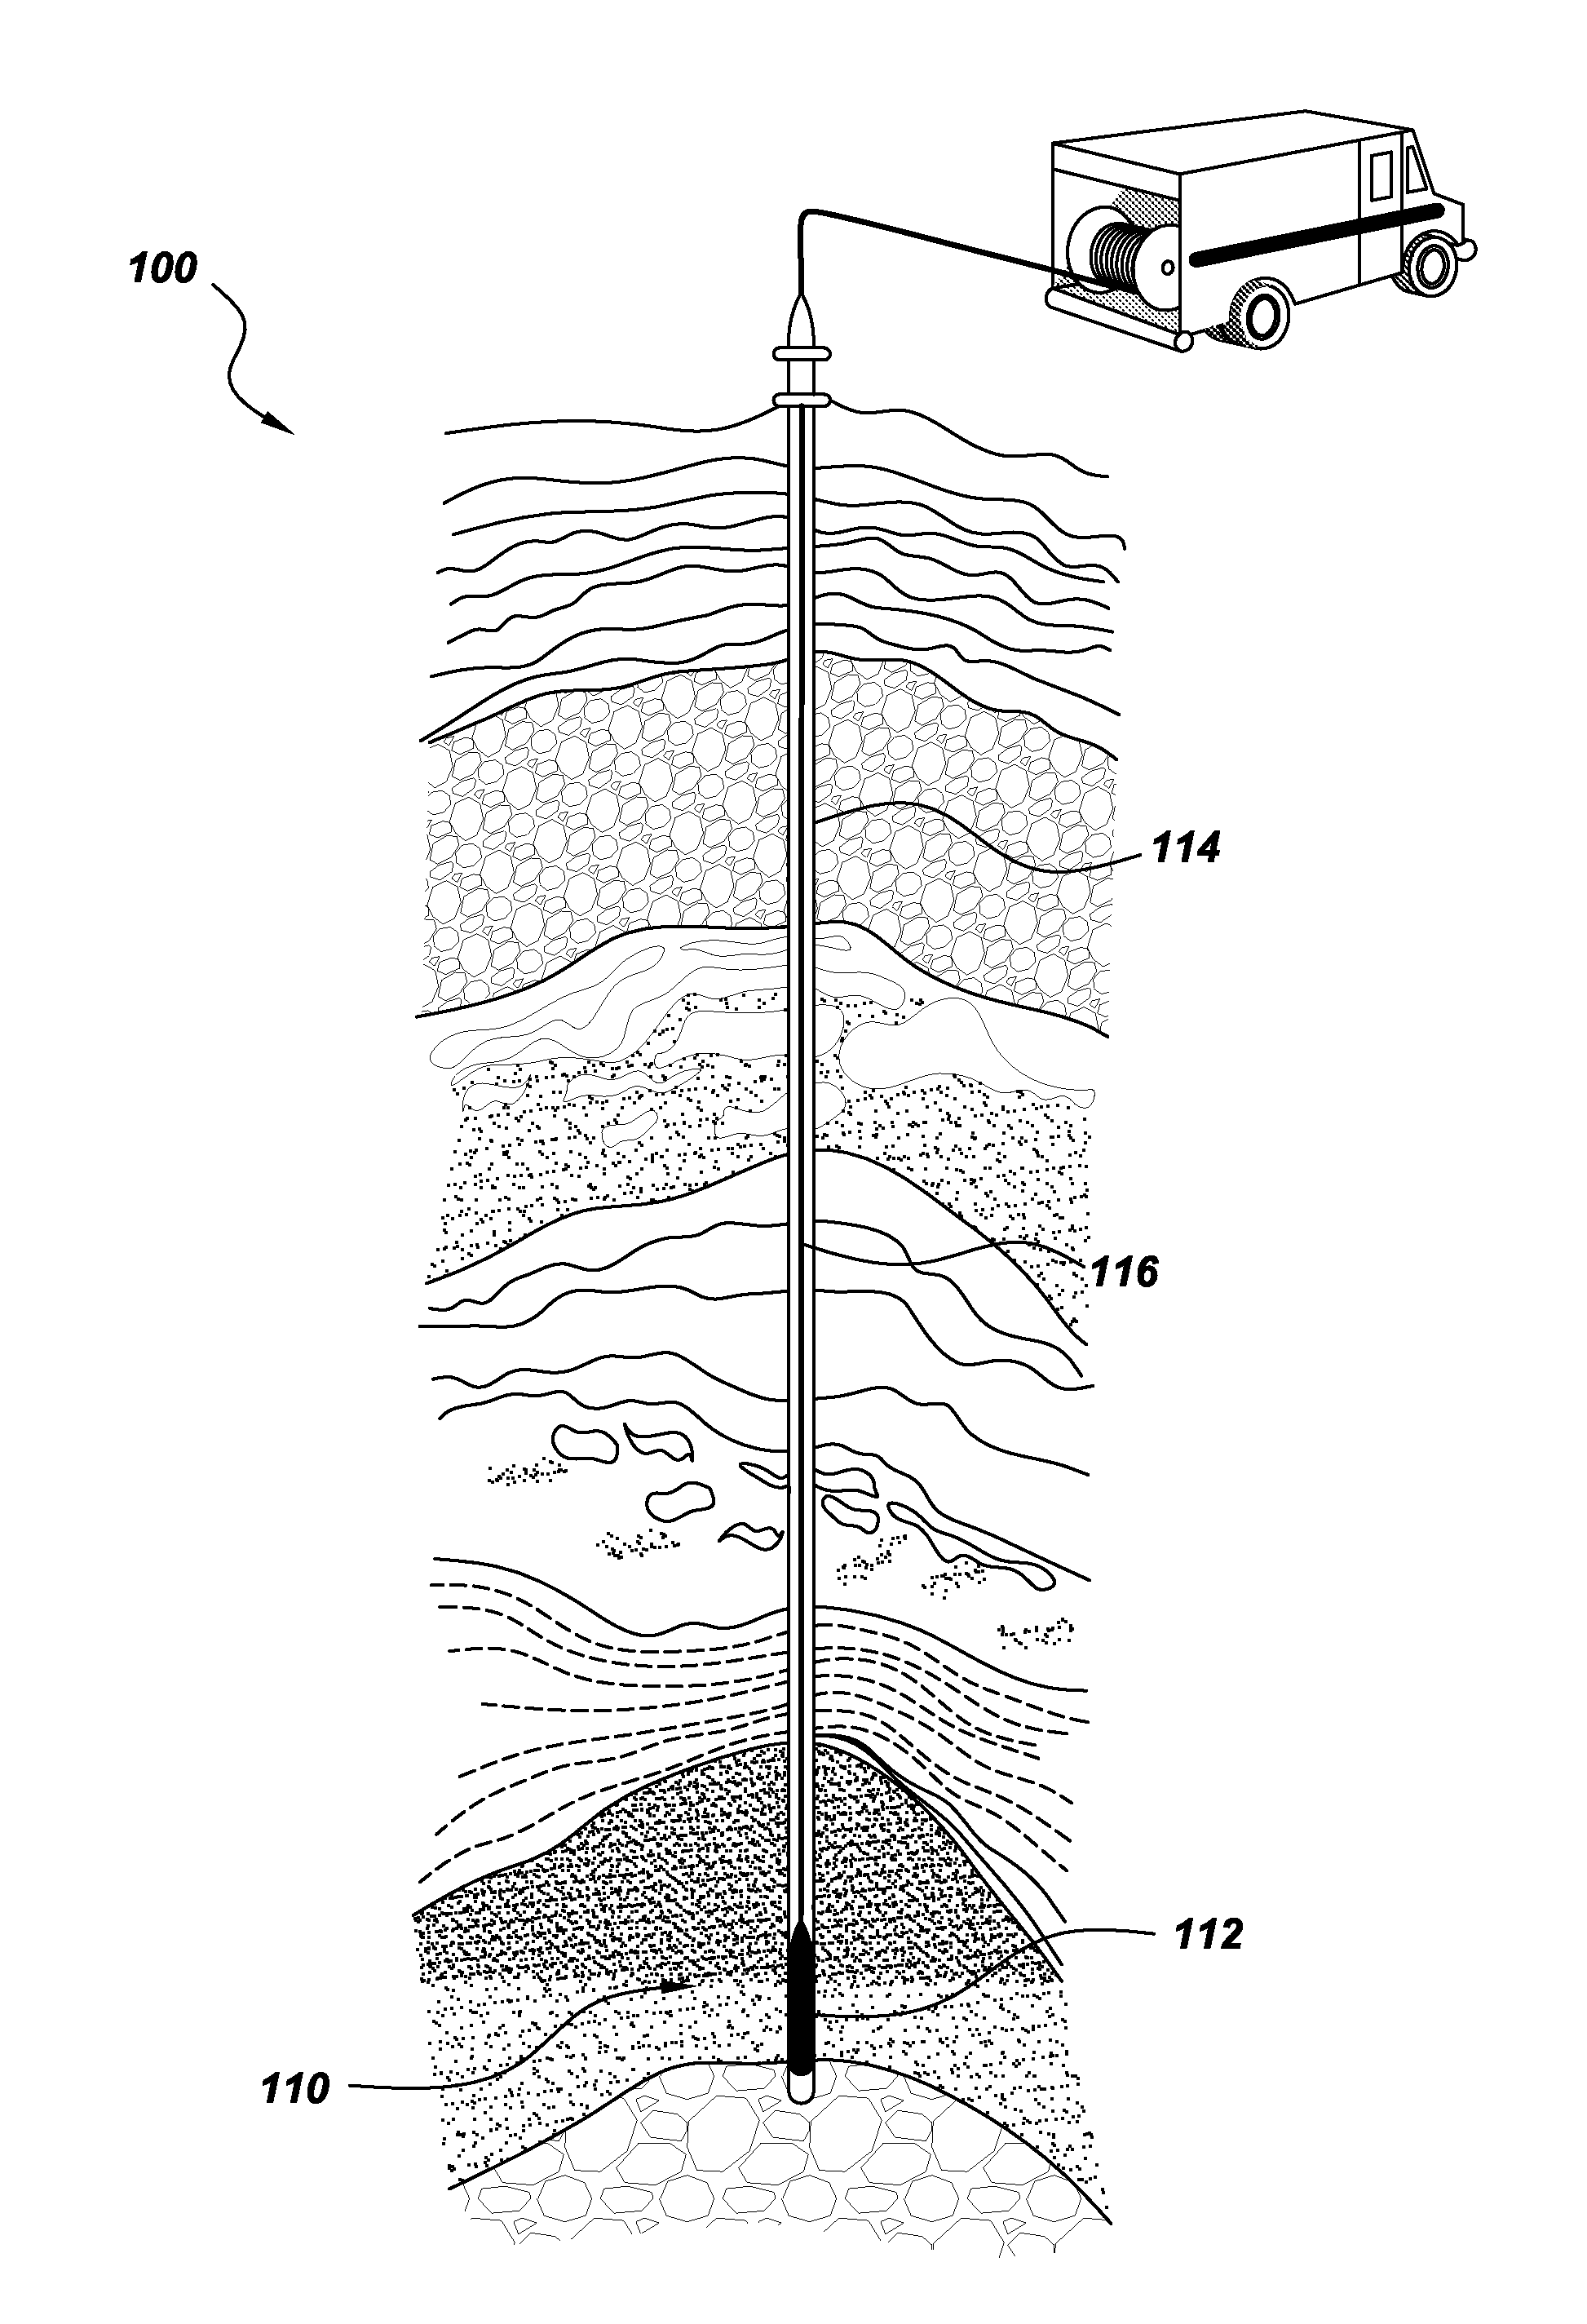 System and method for monitoring down-hole fluids